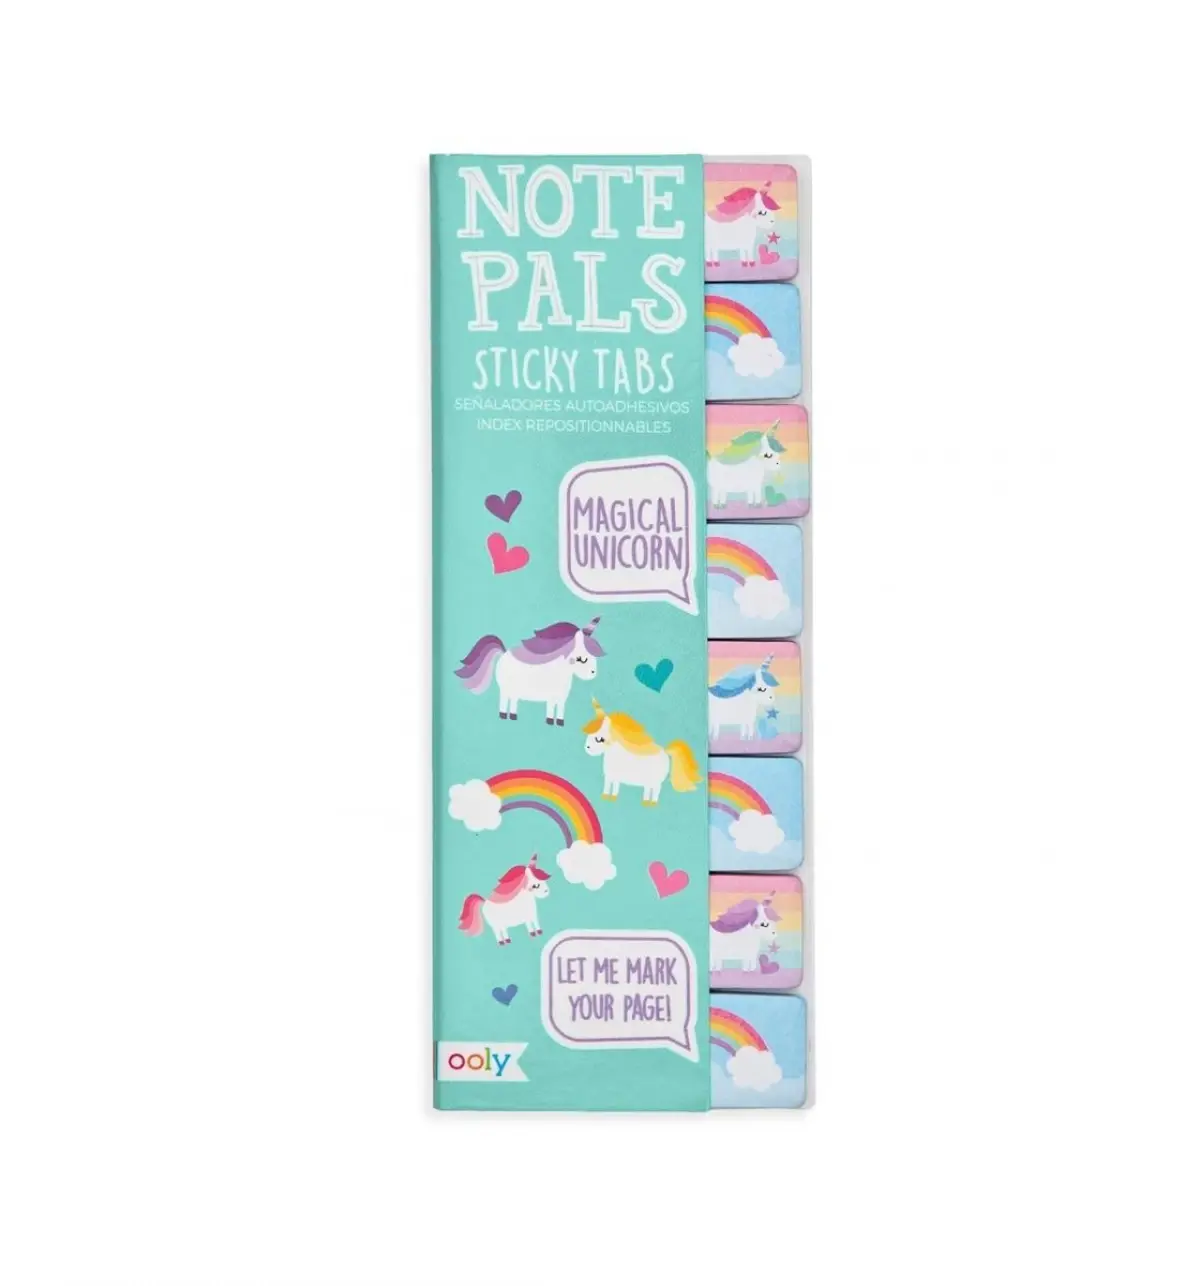 OOLY Note Pals Sticky Tabs Magical Unicorn Multicolour 6Y+